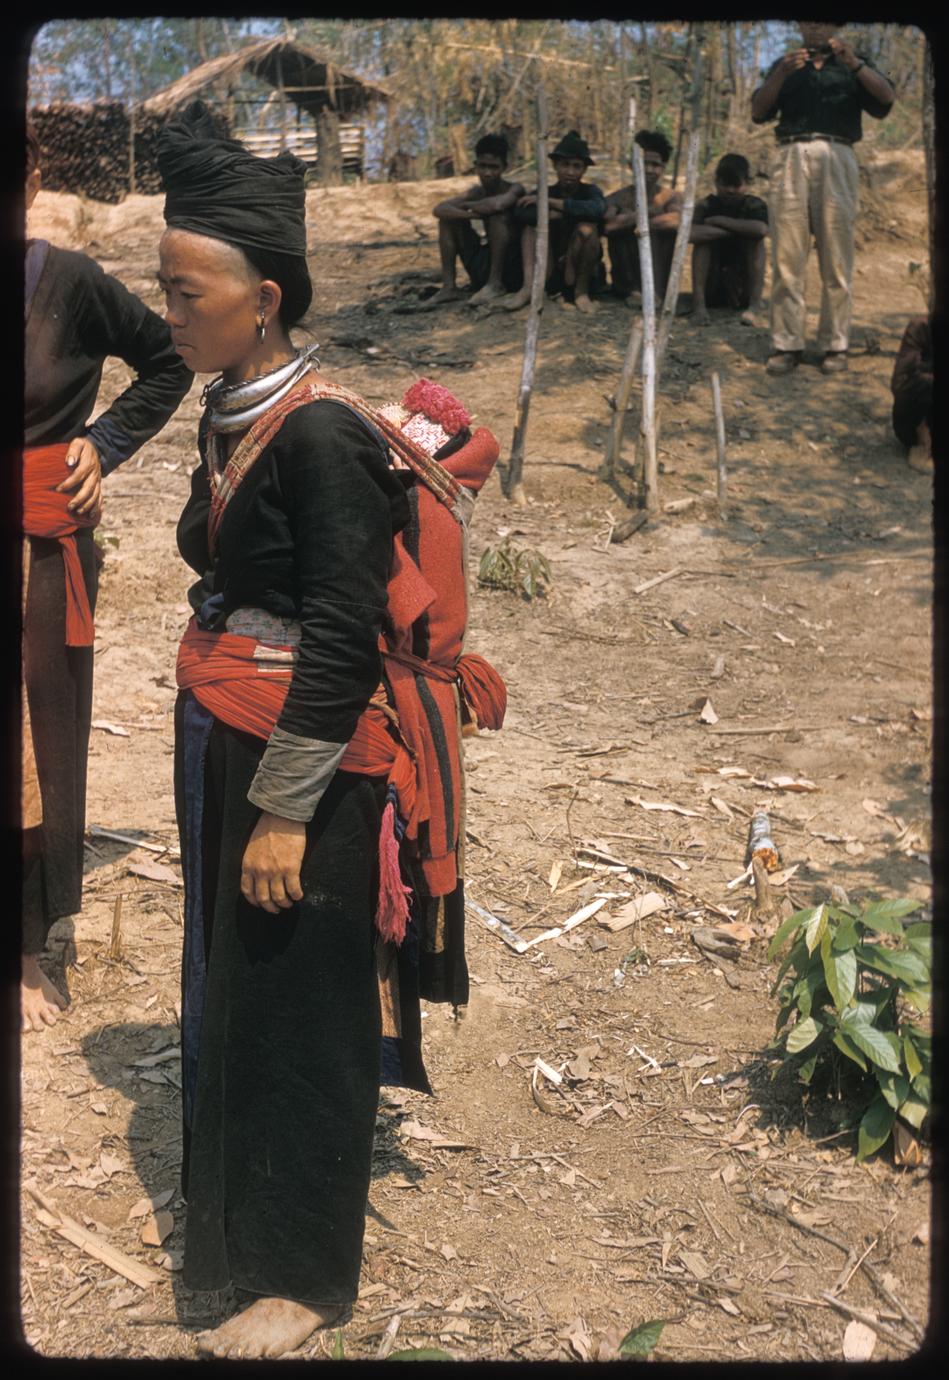 Hmong (Meo) spectator with baby